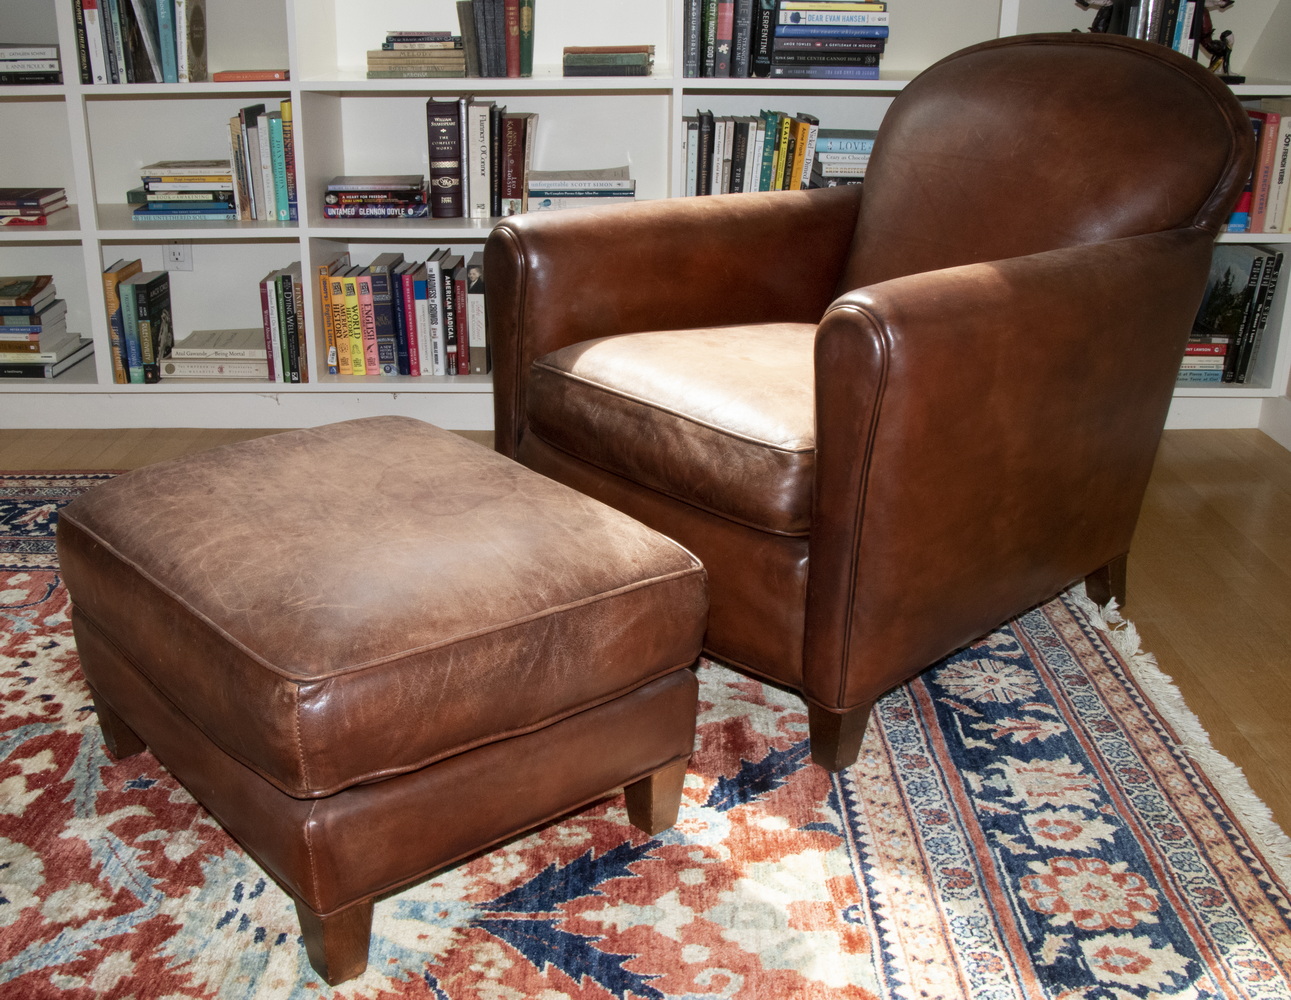 BROWN LEATHER ARMCHAIR WITH OTTOMAN 2b3e5a